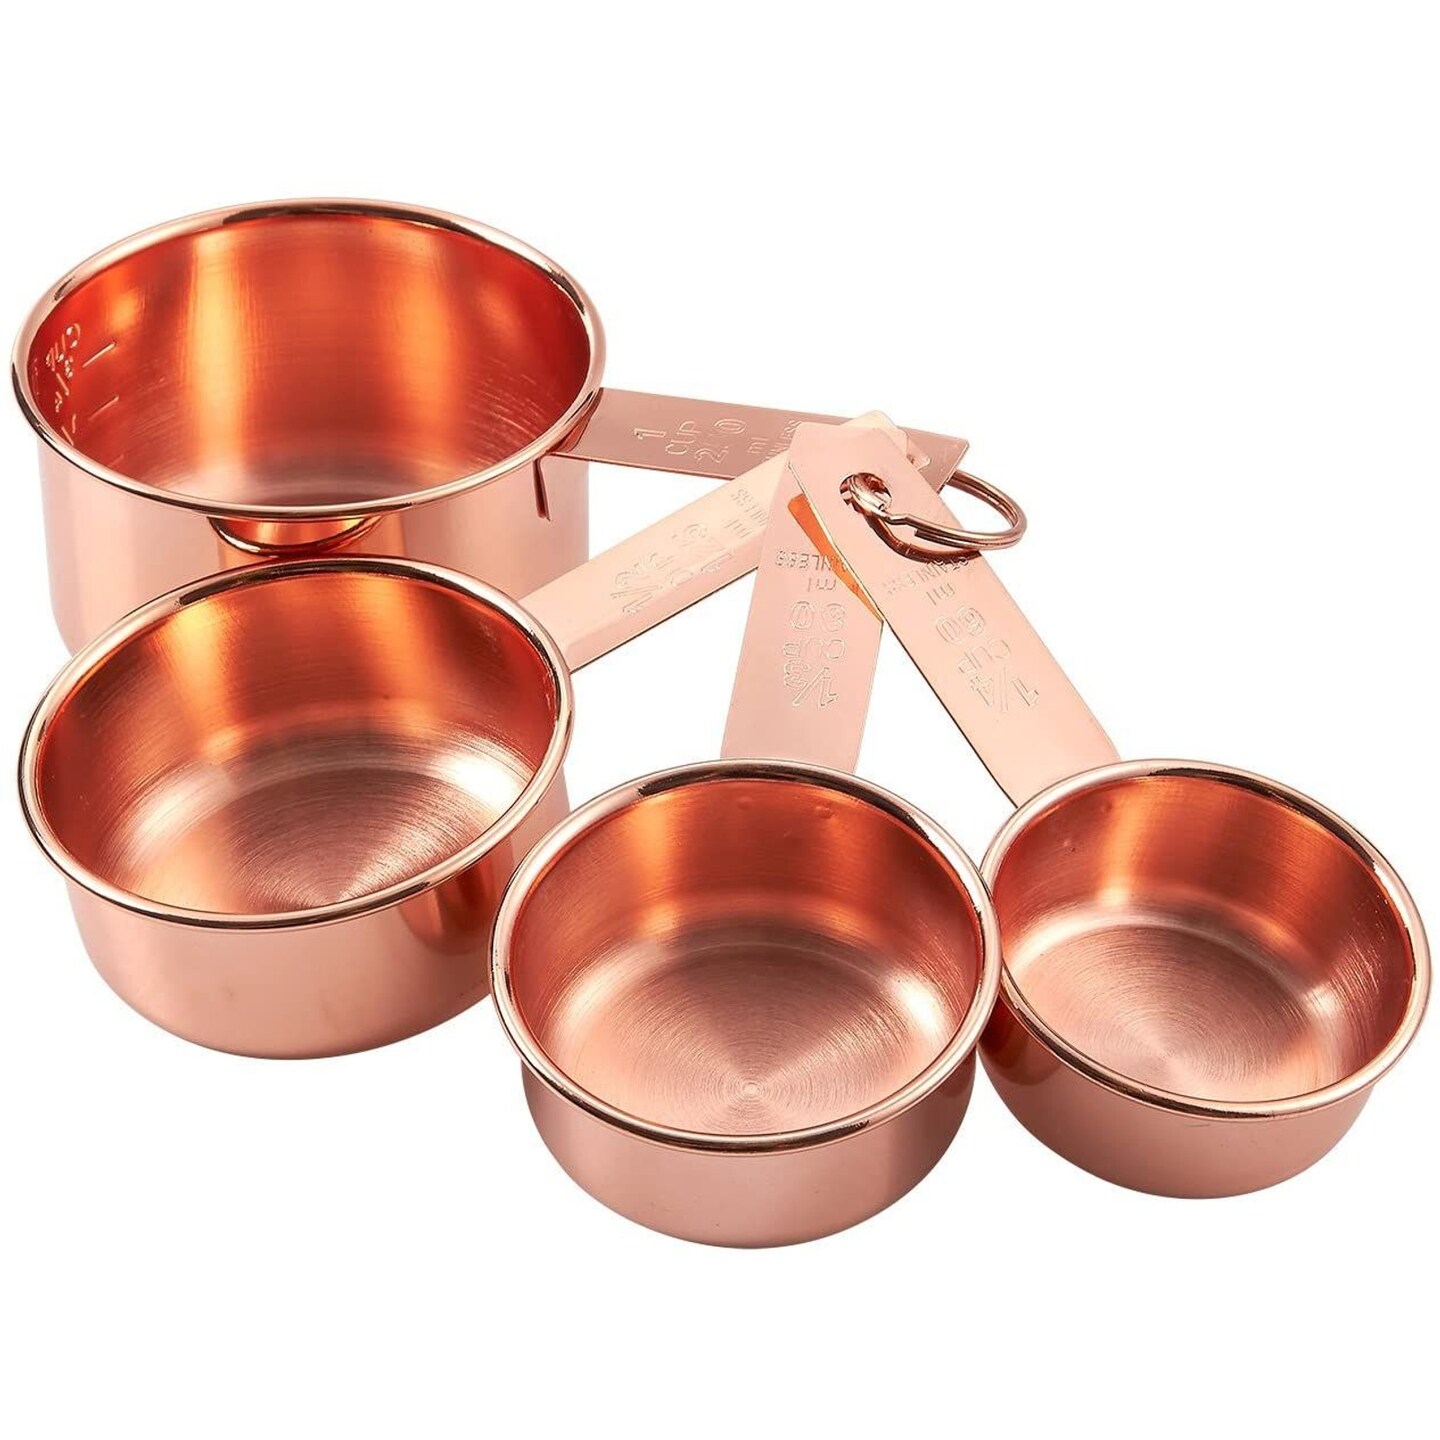 Stainless Steel Measuring Cup Set - Precision Baking & Cooking